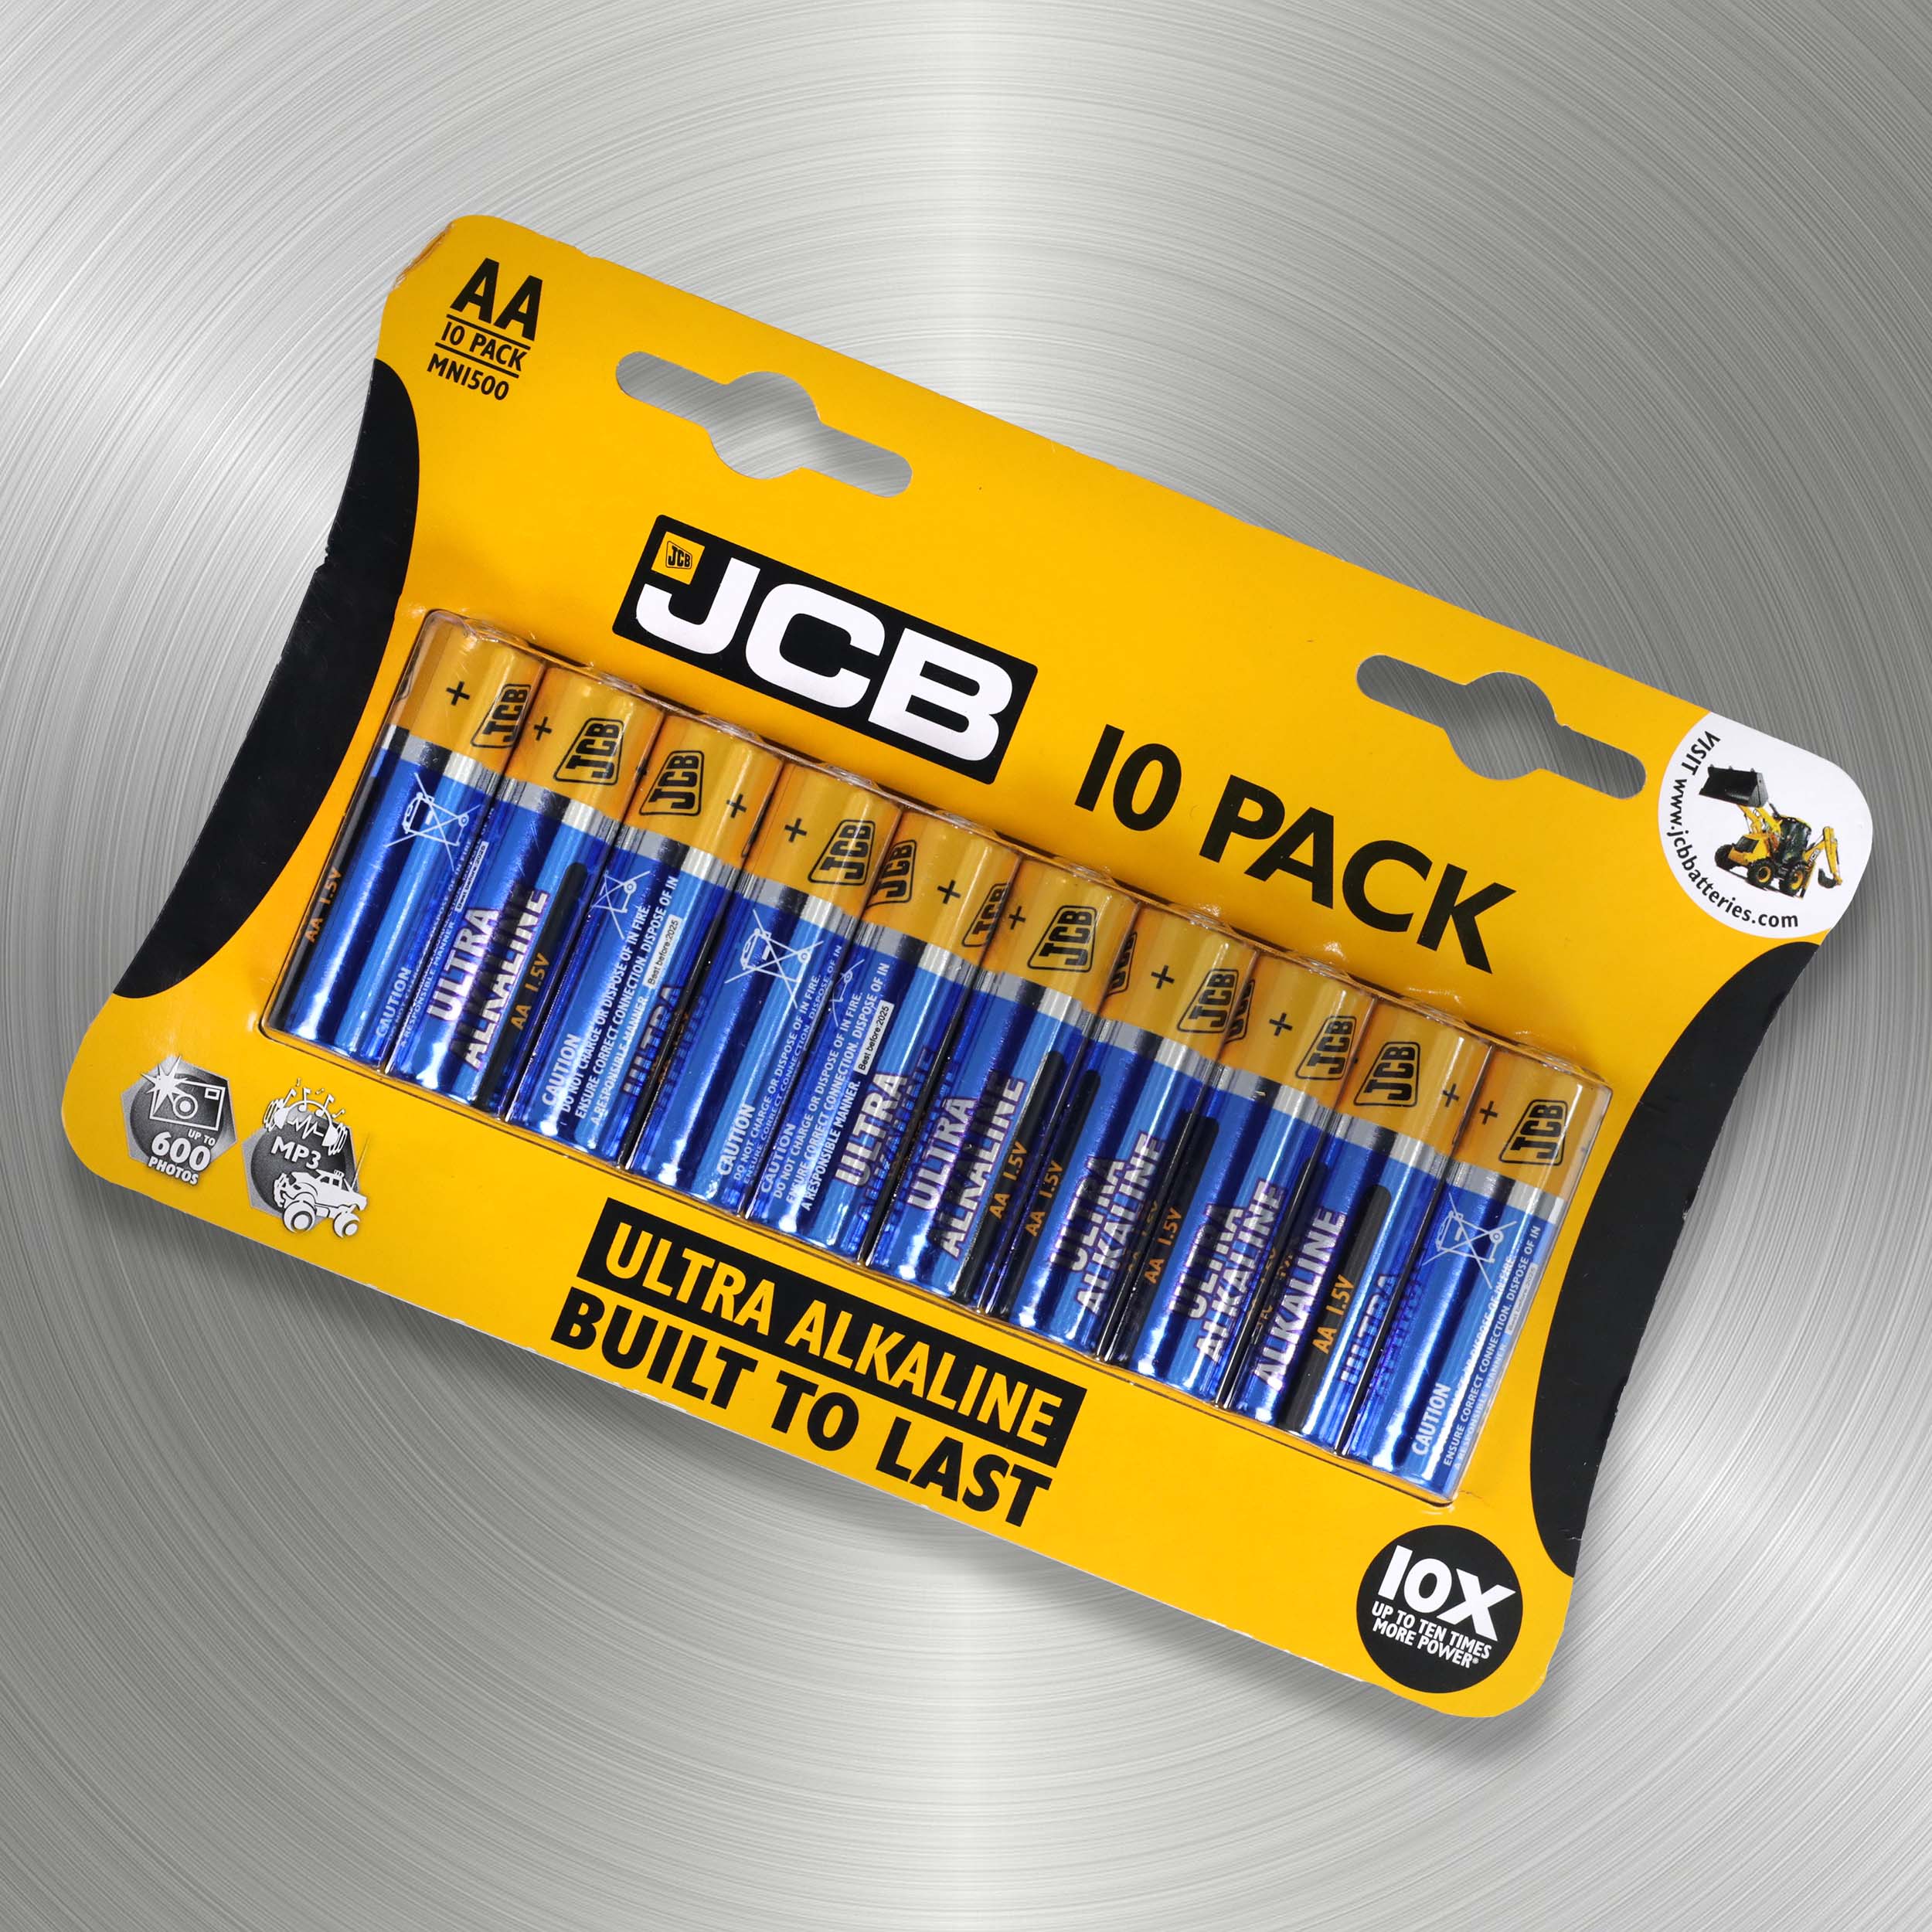 Ultra Alkaline AA - 10 Pack by JCB, sold by In-Excess